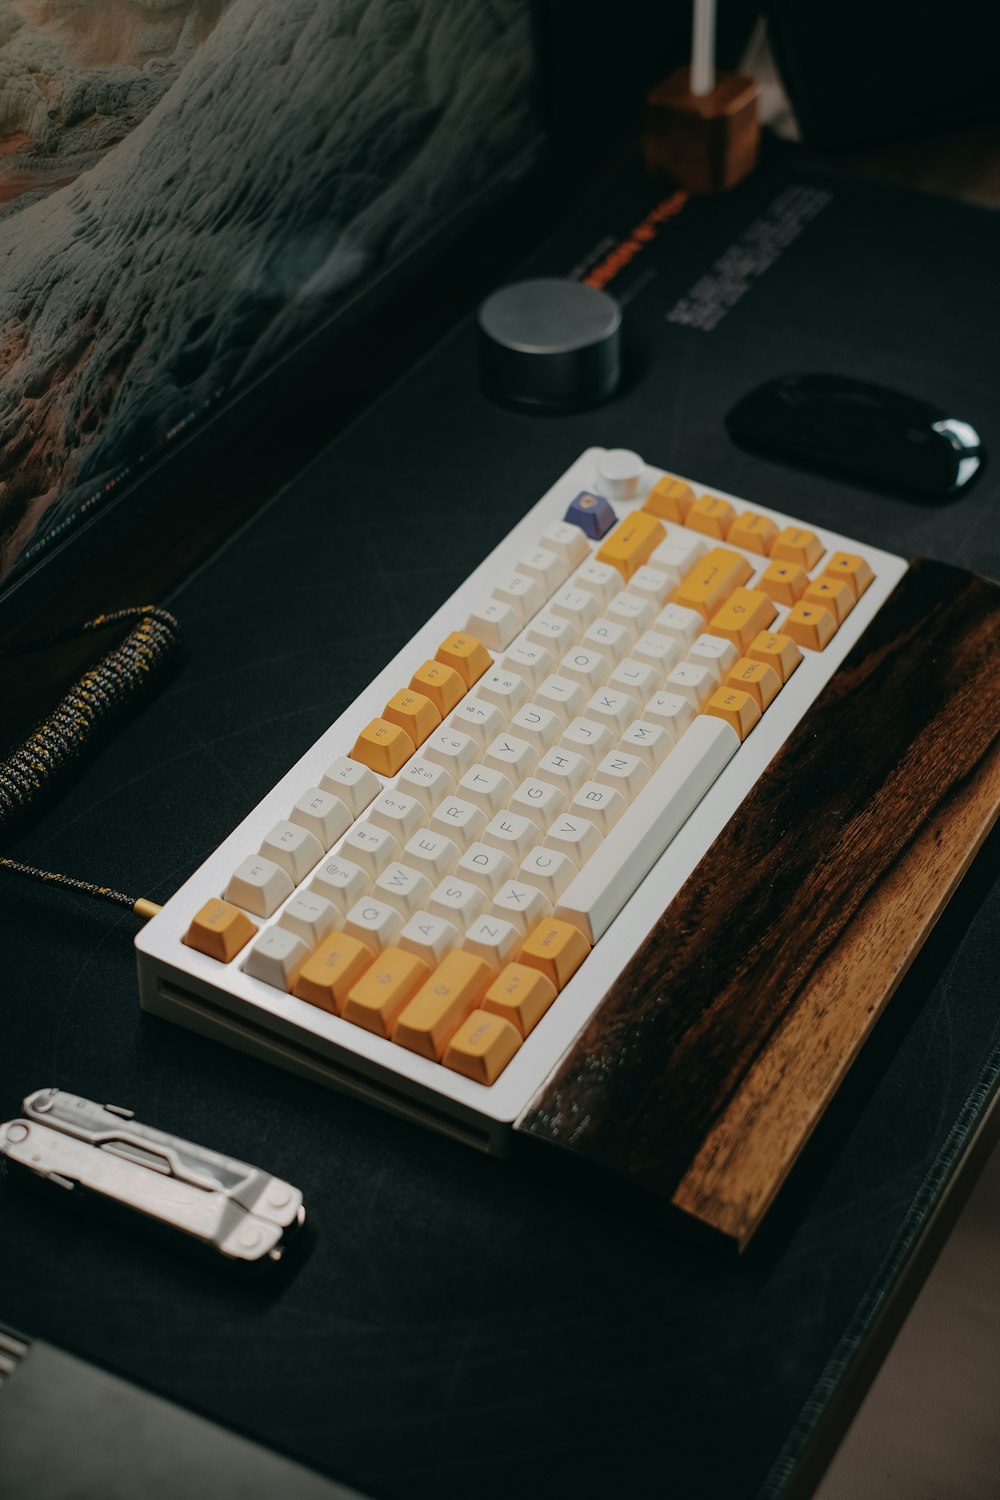 a keyboard sitting on top of a table next to a mouse